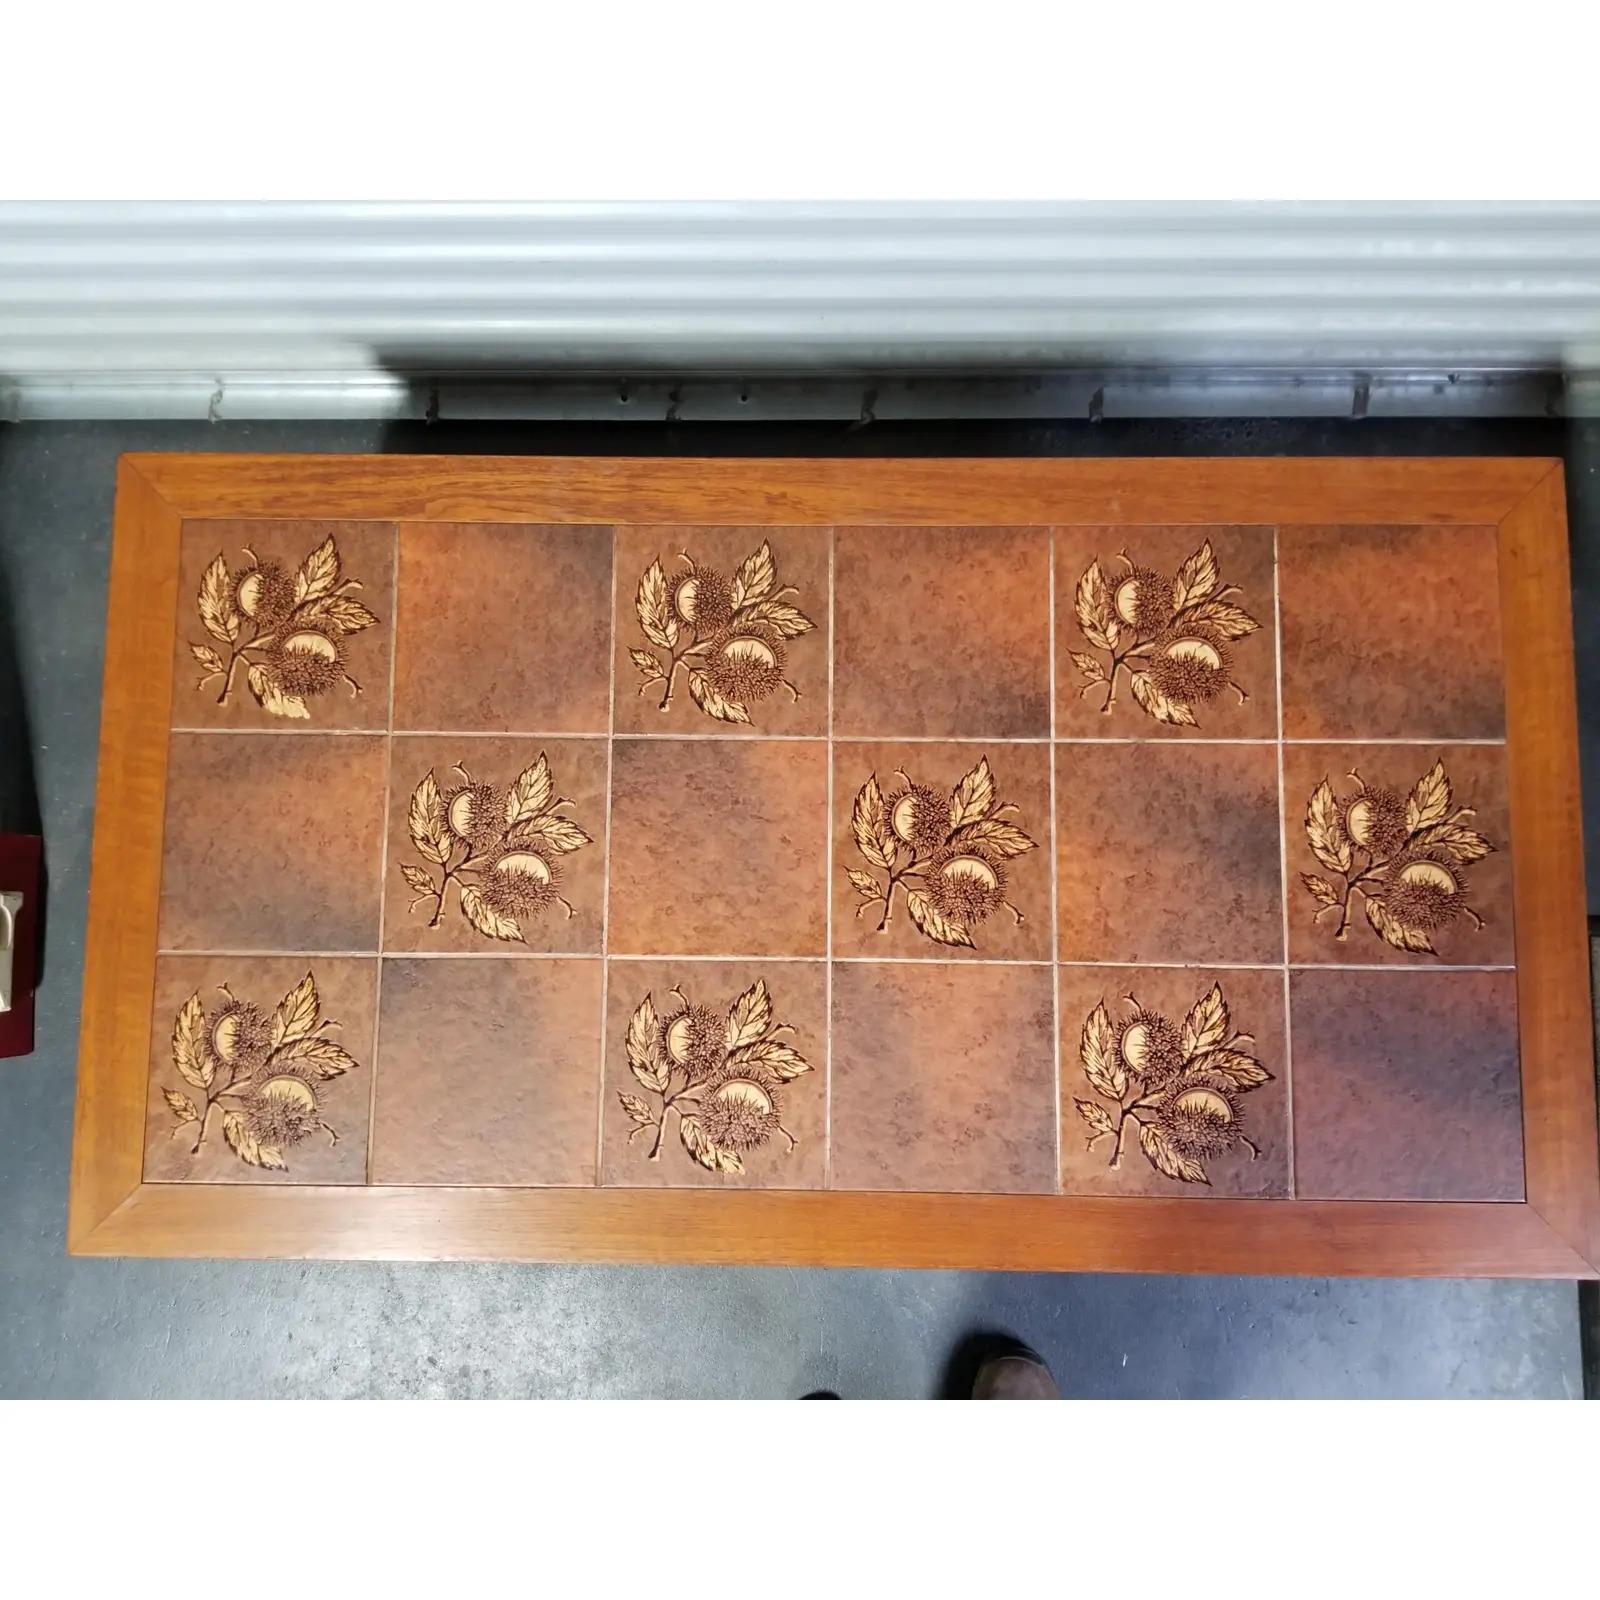 Teak and ceramic tile Danish modern coffee table, circa 1970s. Solid teak legs, apron and frame. Brown and tan floral tiles with a burnt orange / amber glow. Stamped 